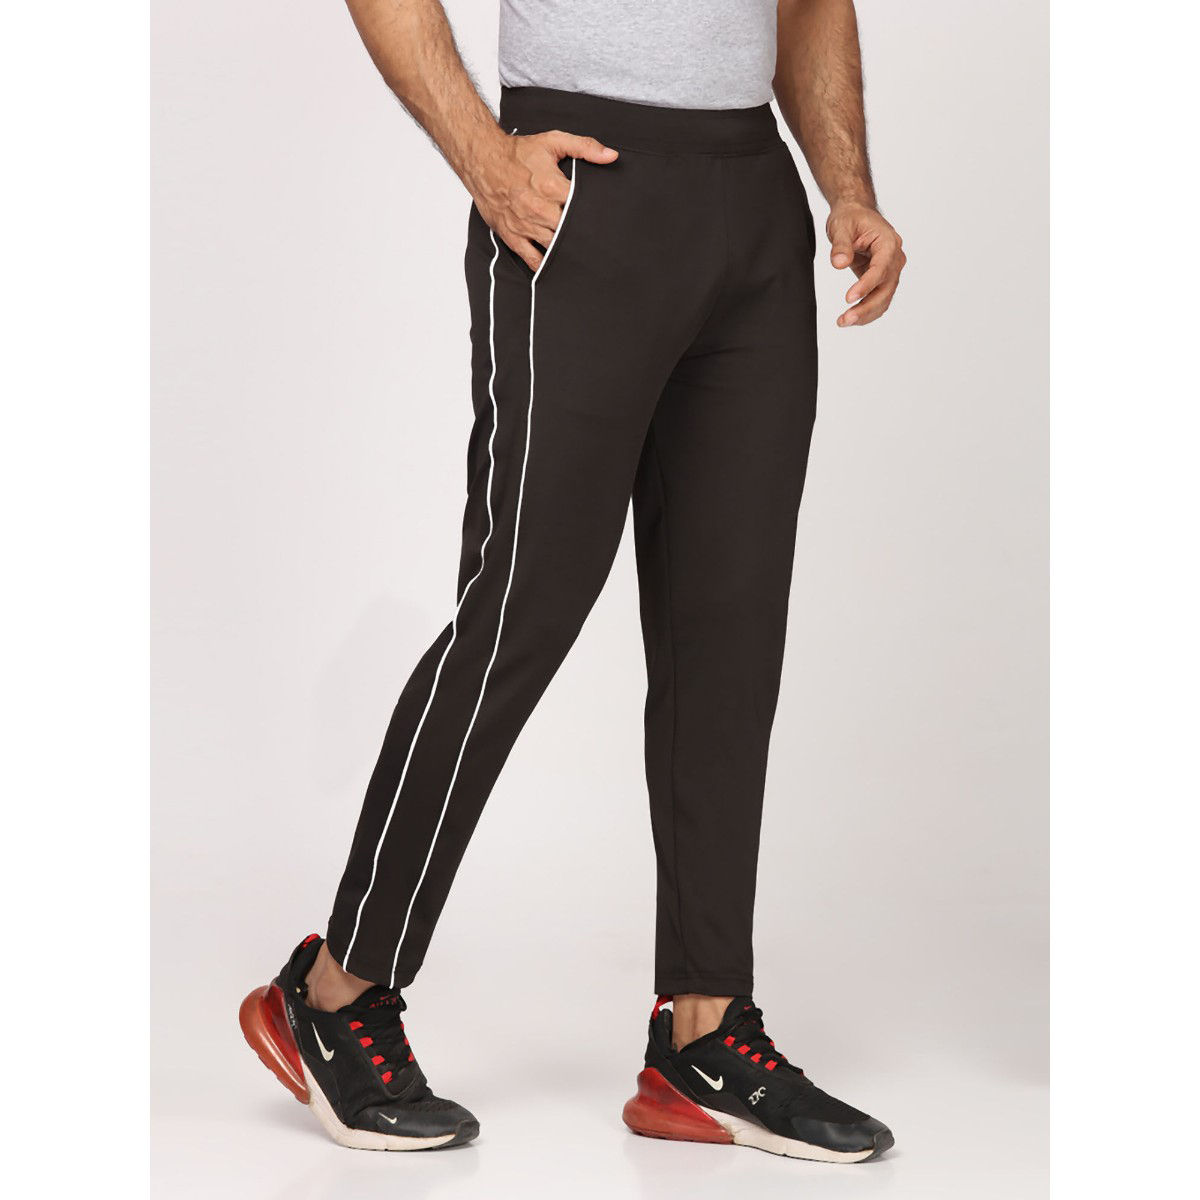 Buy Charcoal Sport Fit Athleisure Joggers Online at Muftijeans